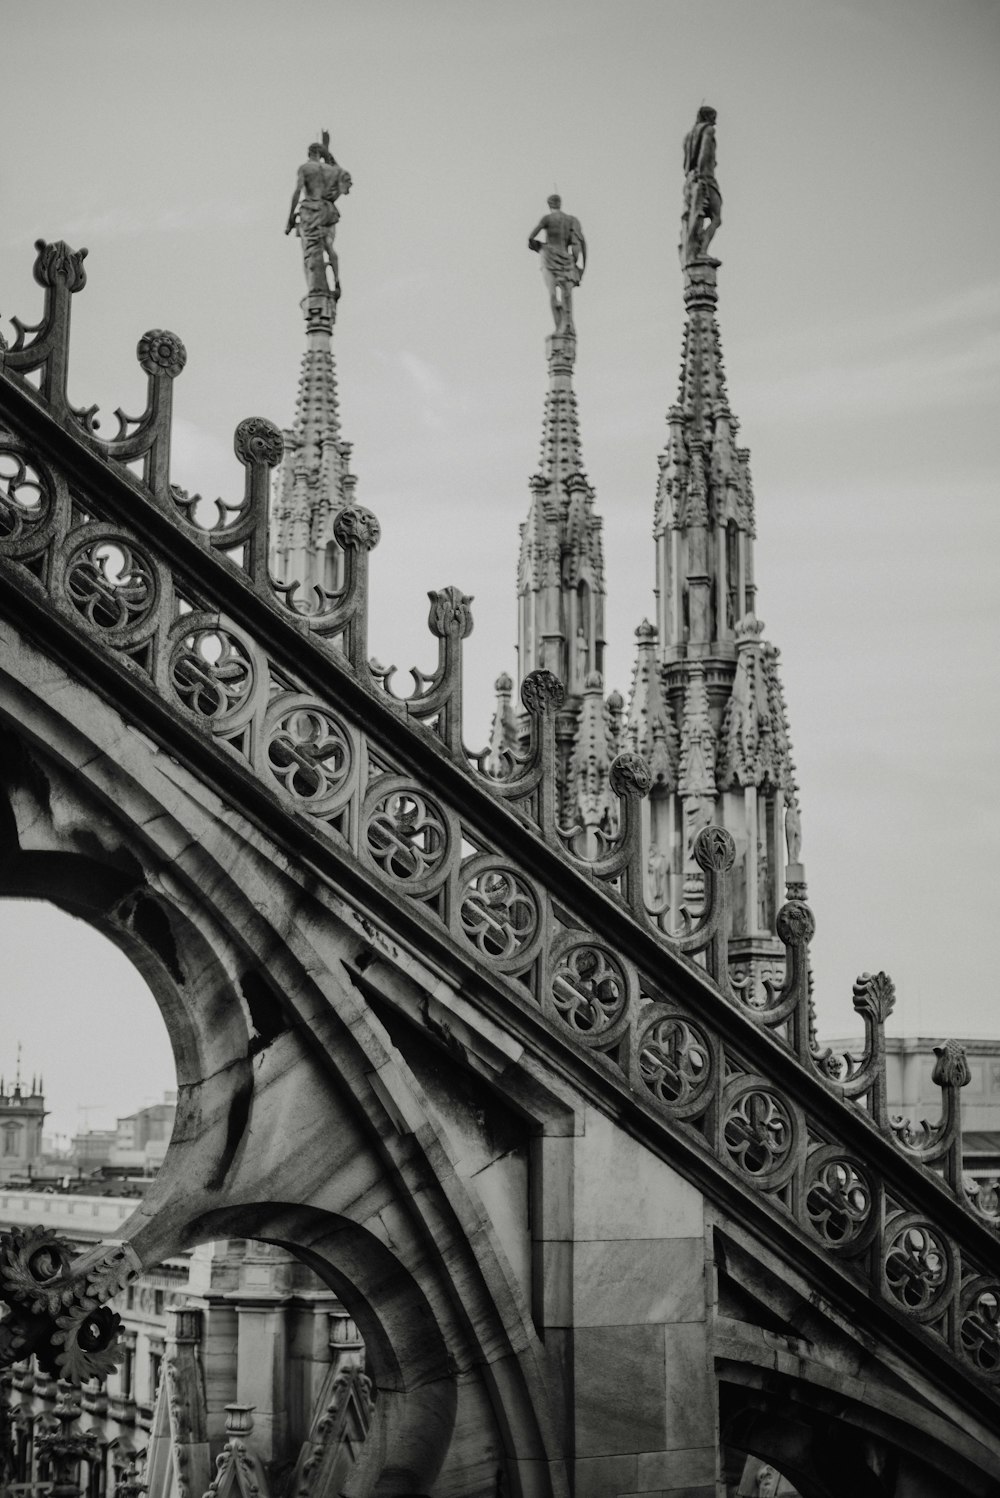 a black and white photo of a bridge with ornate architecture